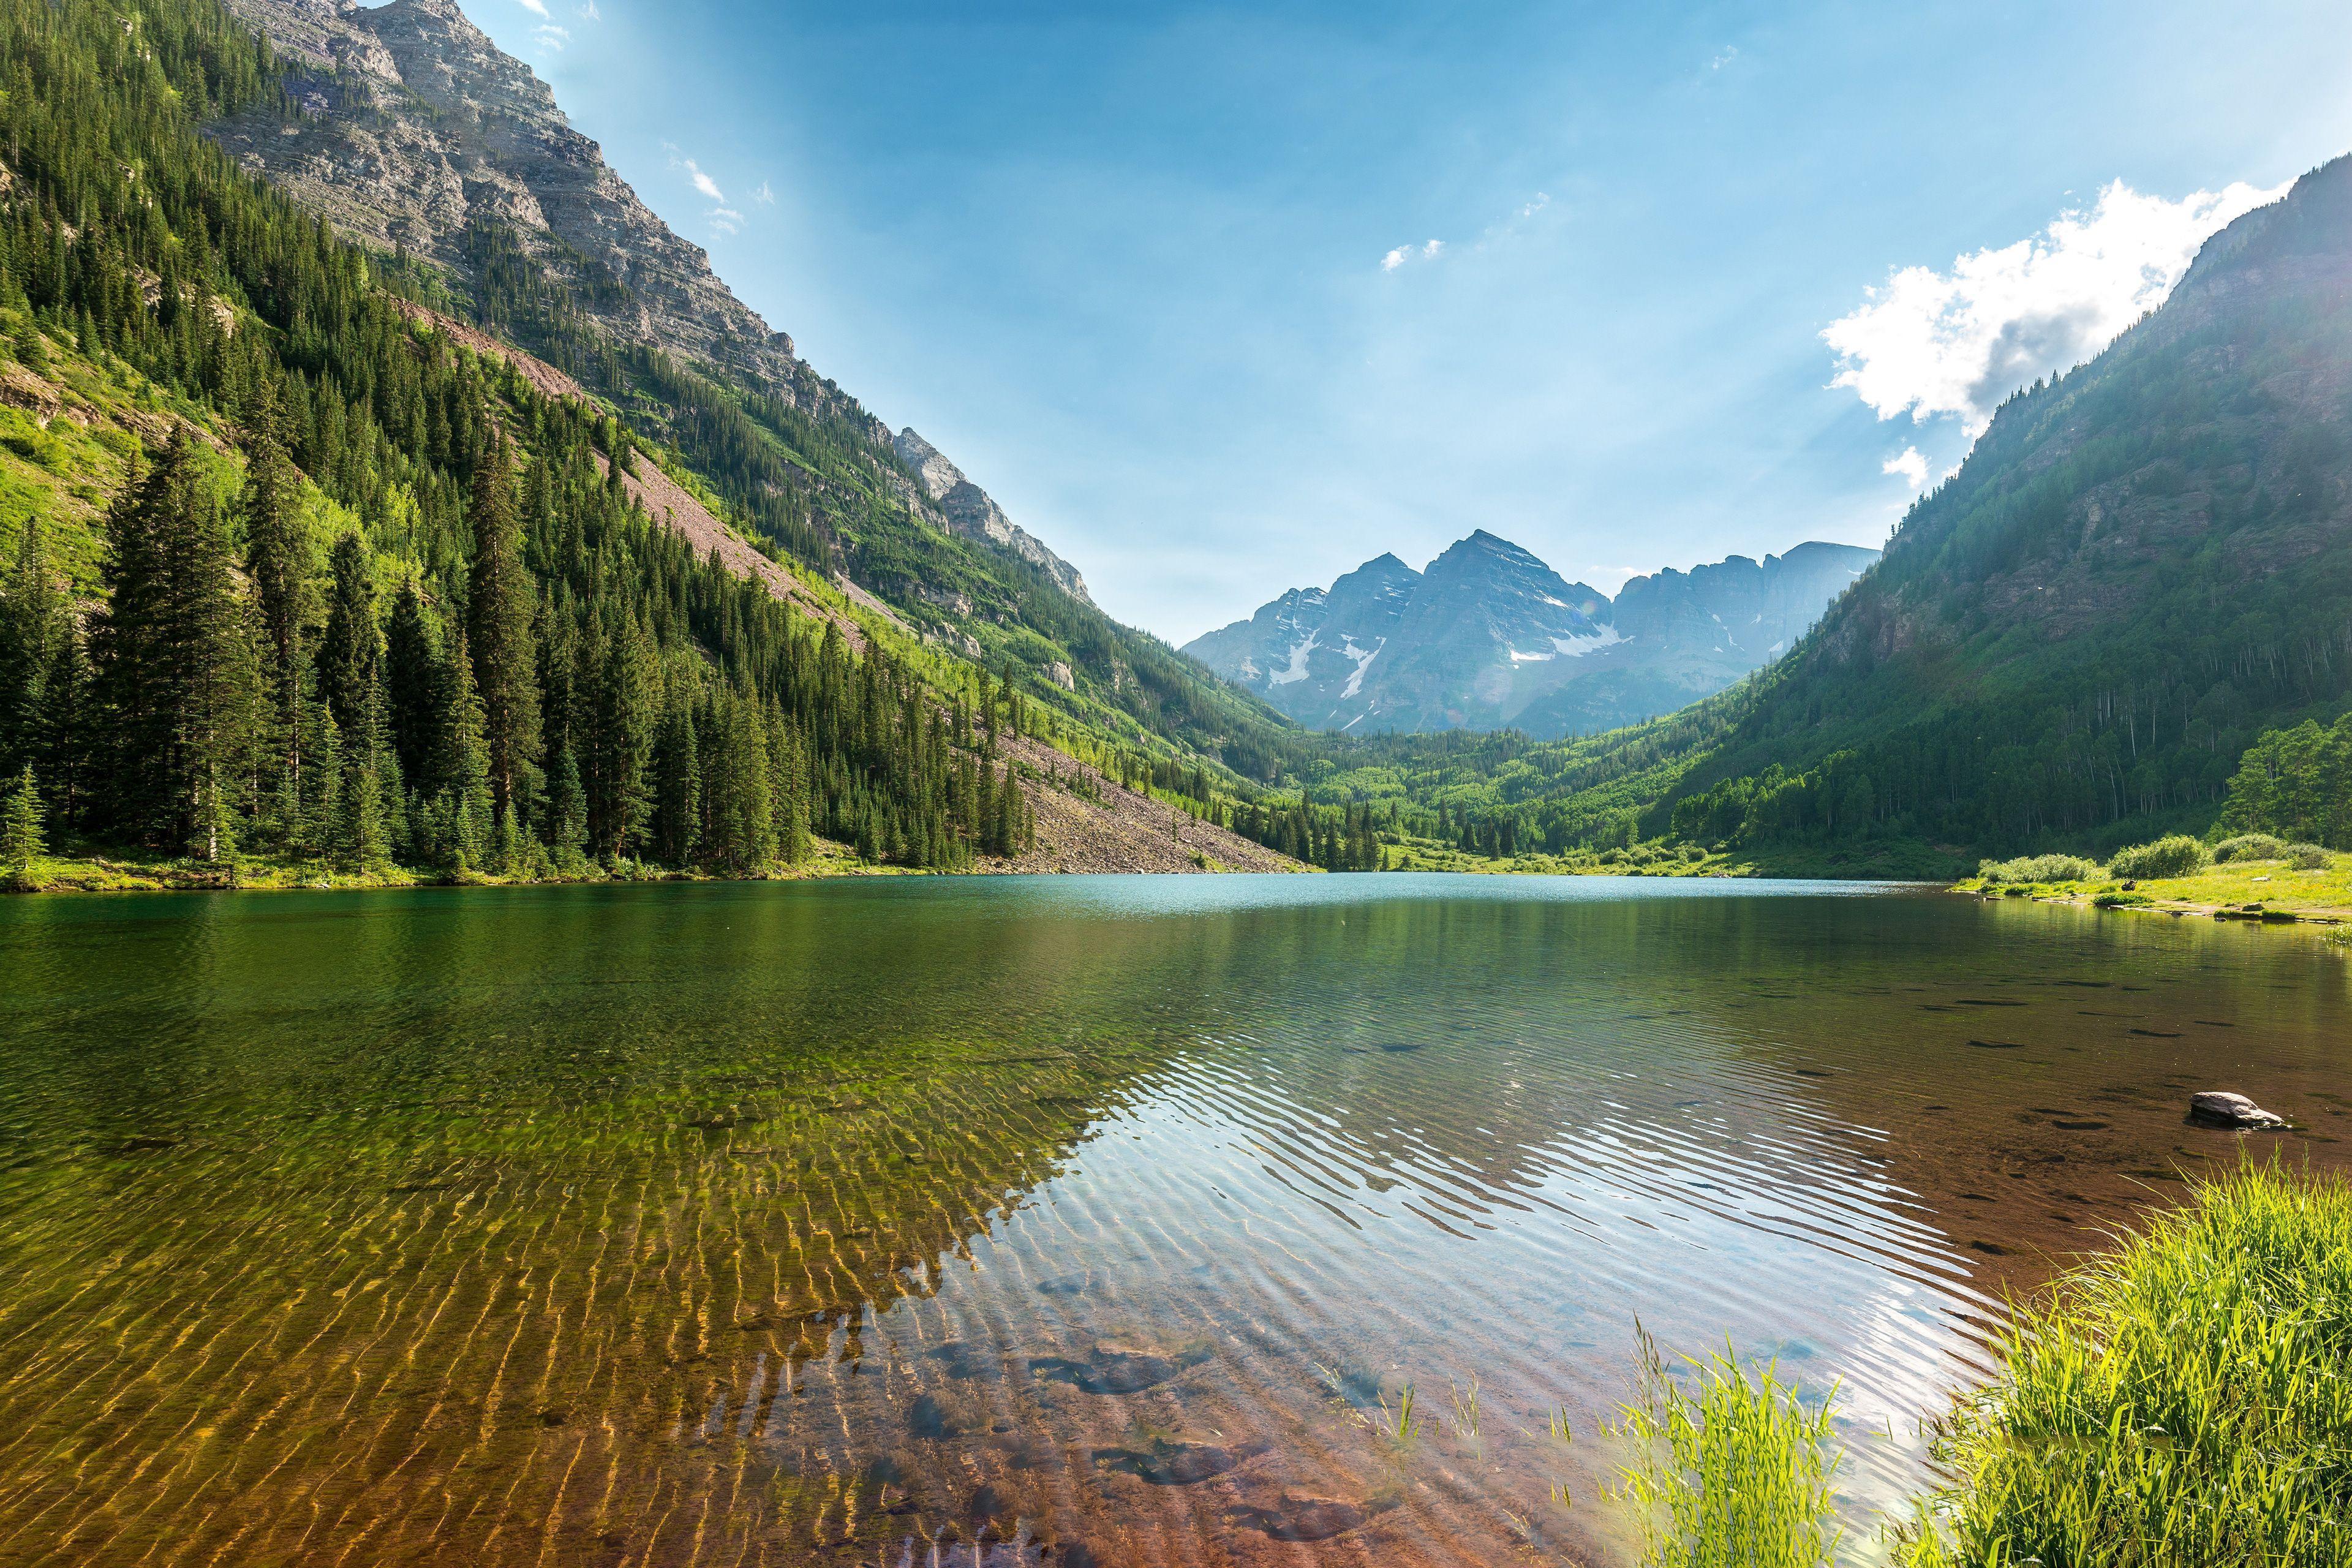 Nature Lake And Mountains 4k HD Dell Xps 13 wallpaper. Tablet wallpaper and background